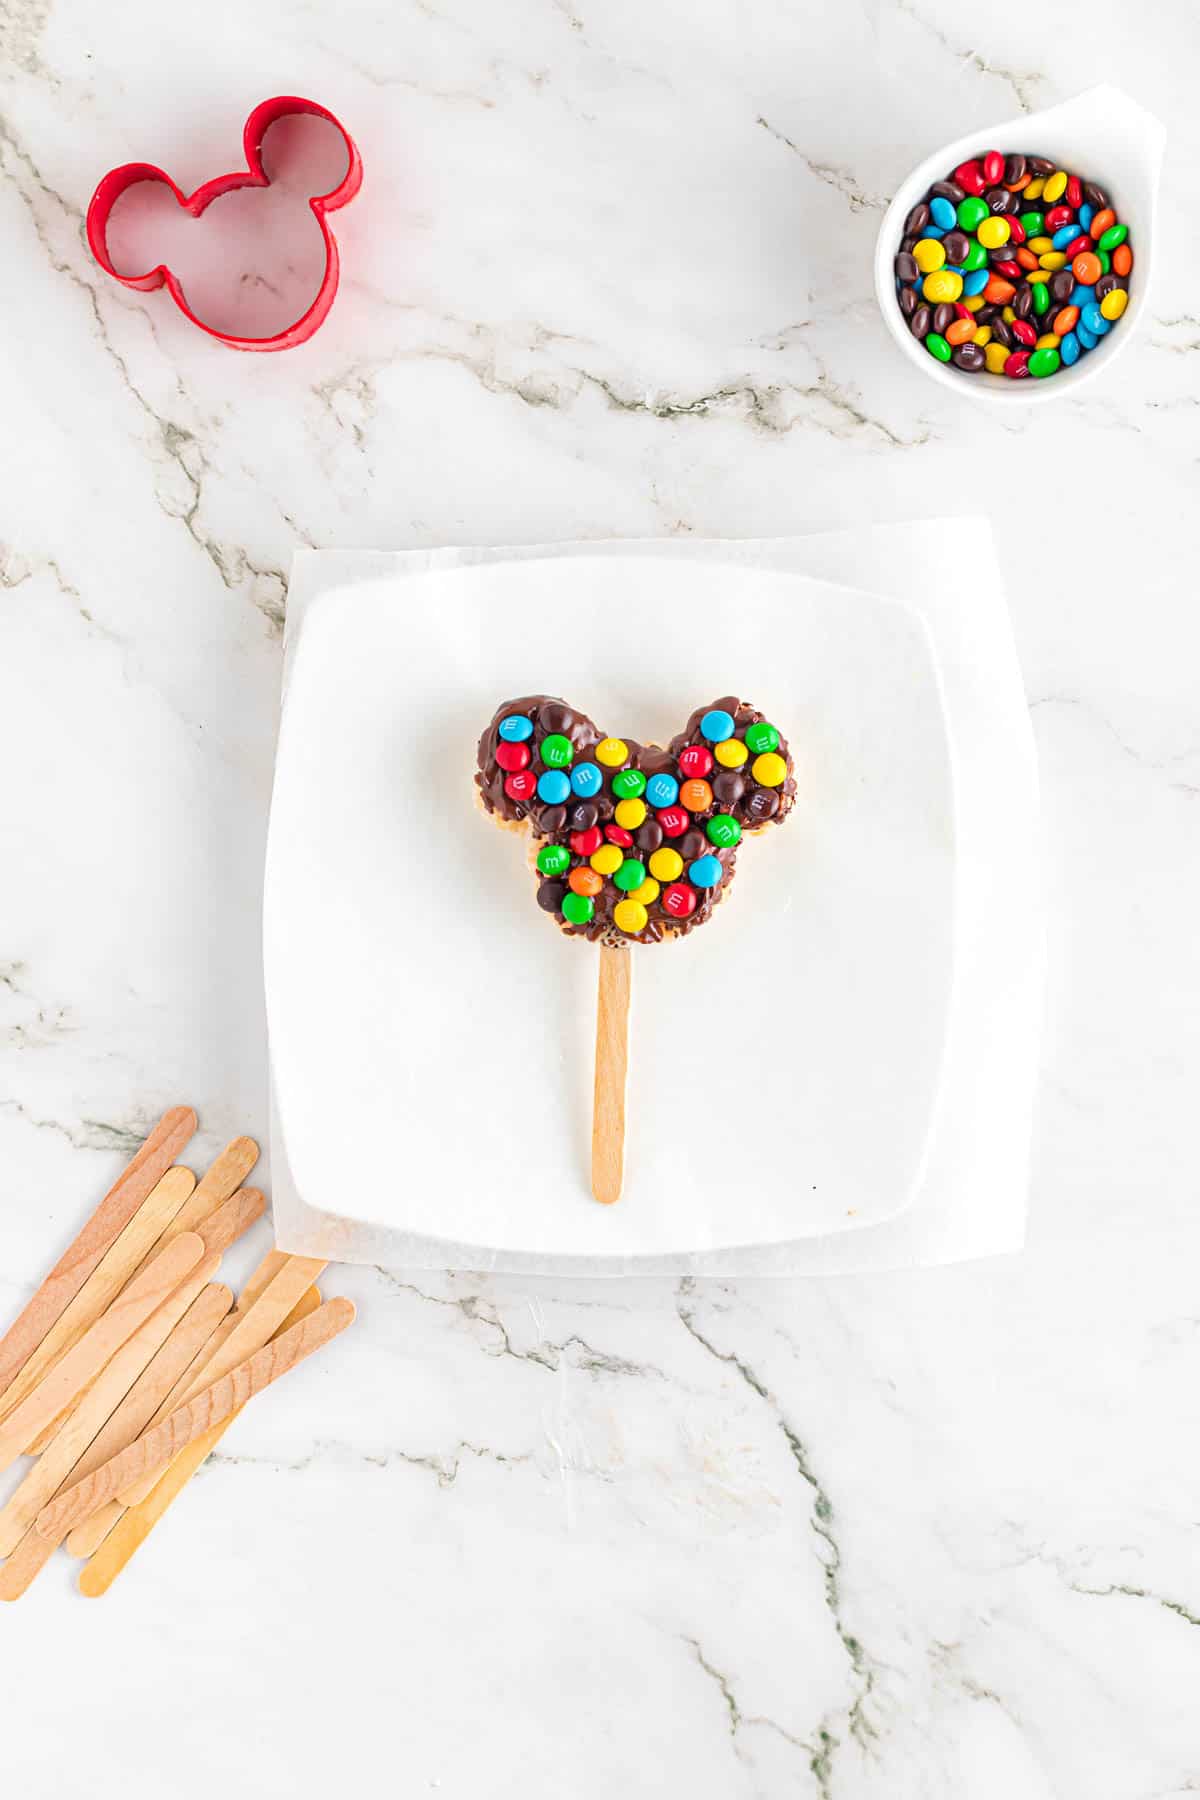 A mickey rice krispy treat that has been dipped in chocolate and pressed in mini M&M's.